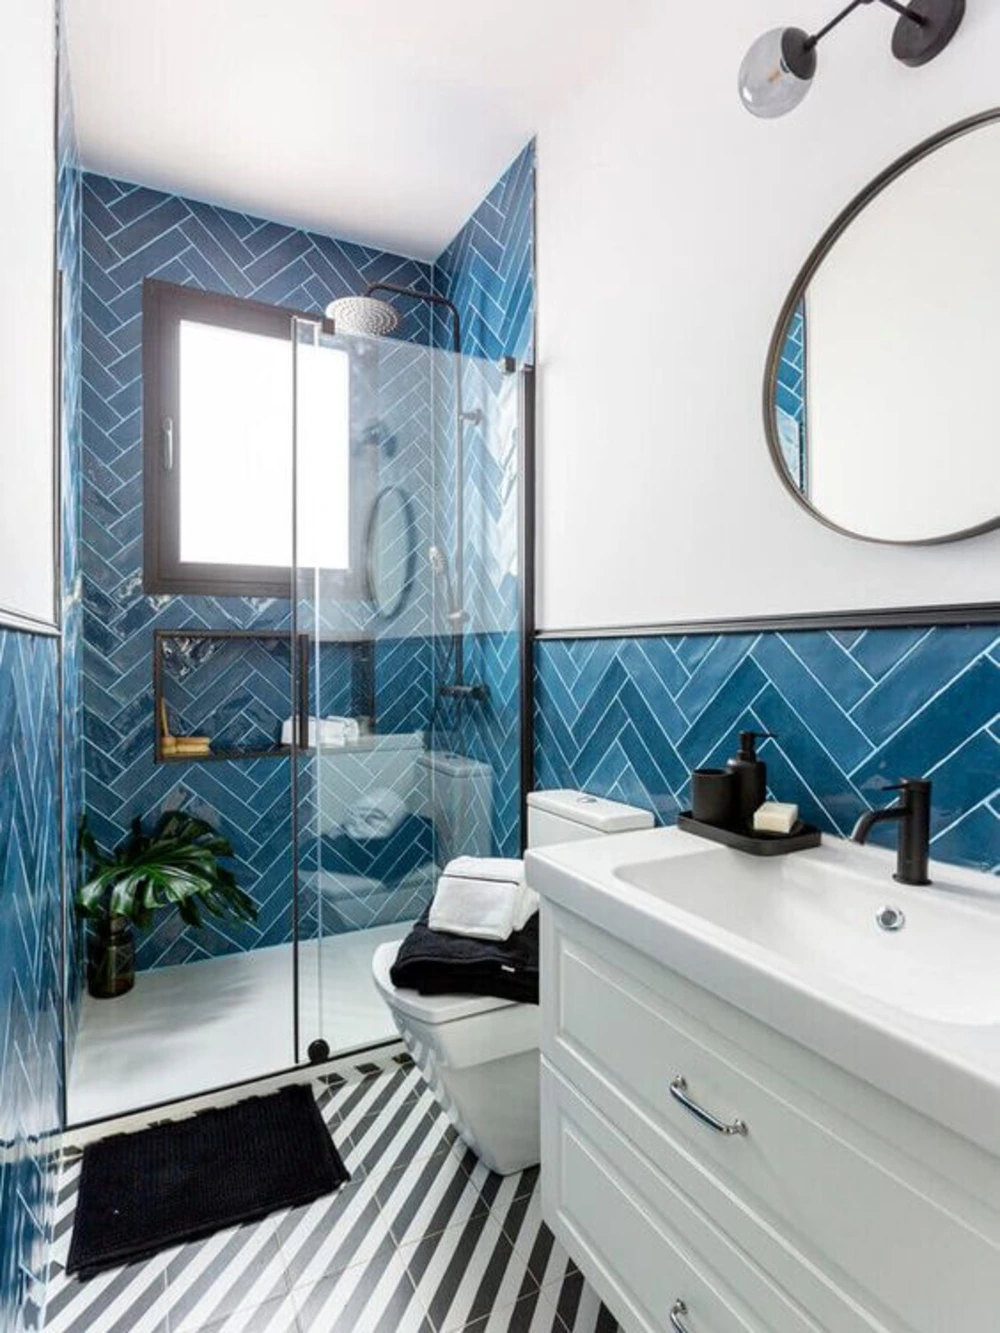 https://foyr.com/learn/wp-content/uploads/2023/02/small-bathroom-color-schemes-soothing-sapphire-blue-and-white.webp